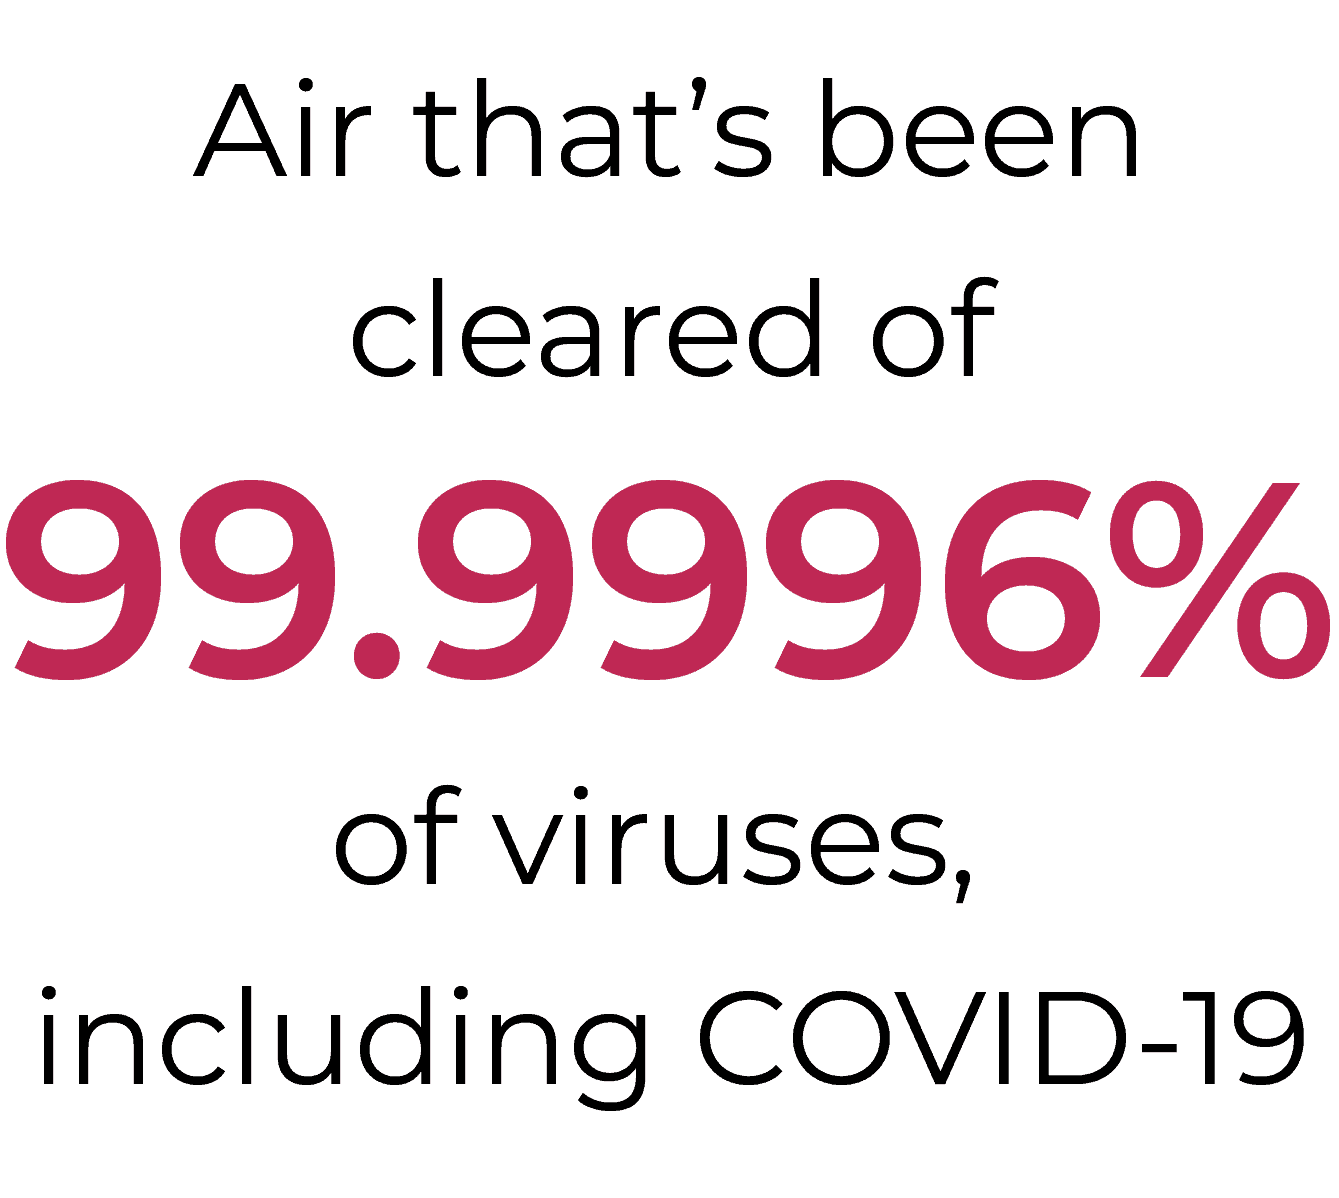 Text that reads "Air that's been cleared of 99.9996% of viruses including COVID-19"